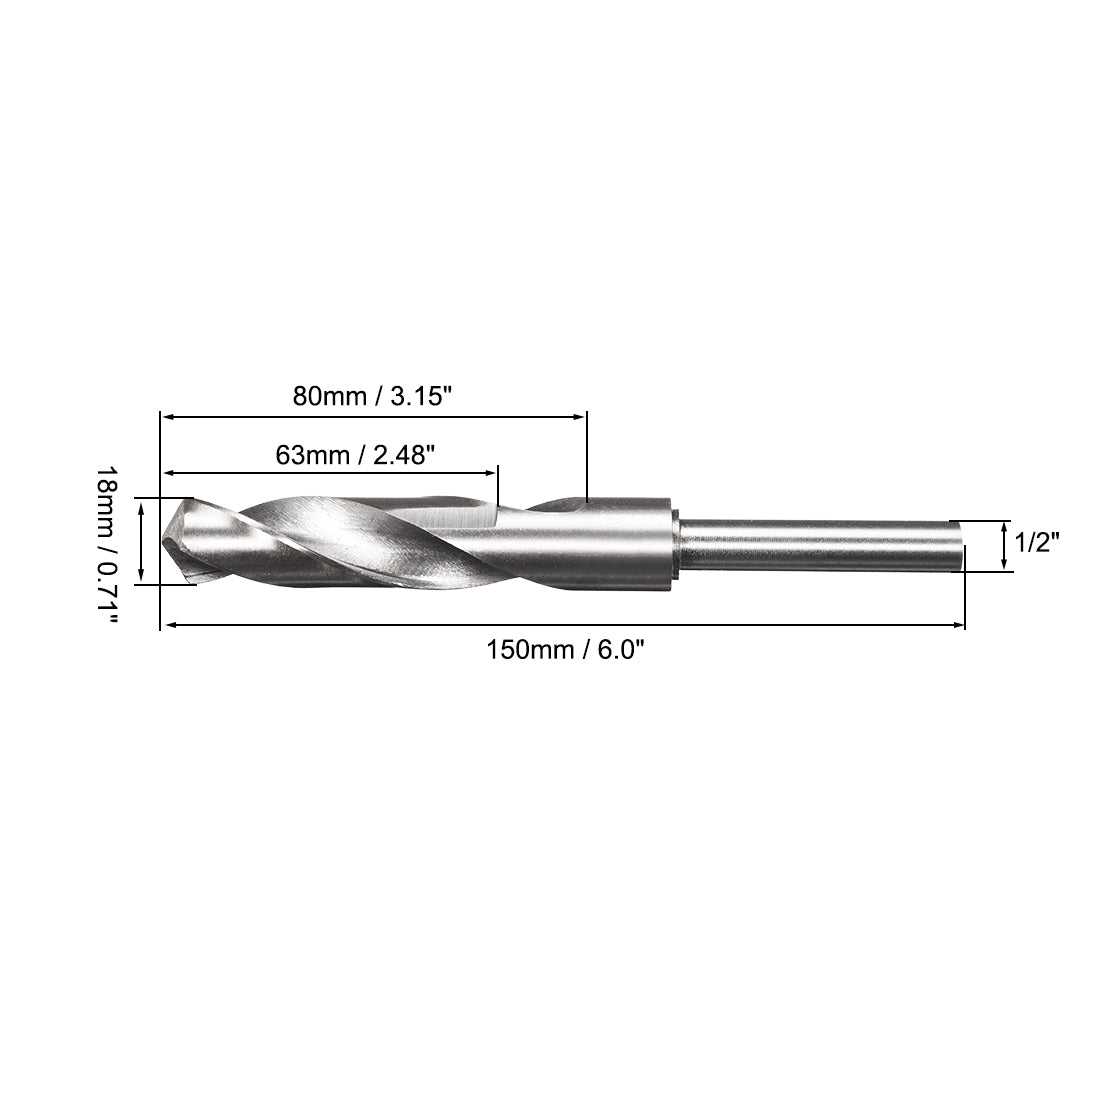 uxcell Uxcell 18mm Reduced Shank Drill Bit High Speed Steel 4241 with 1/2" Straight Shank